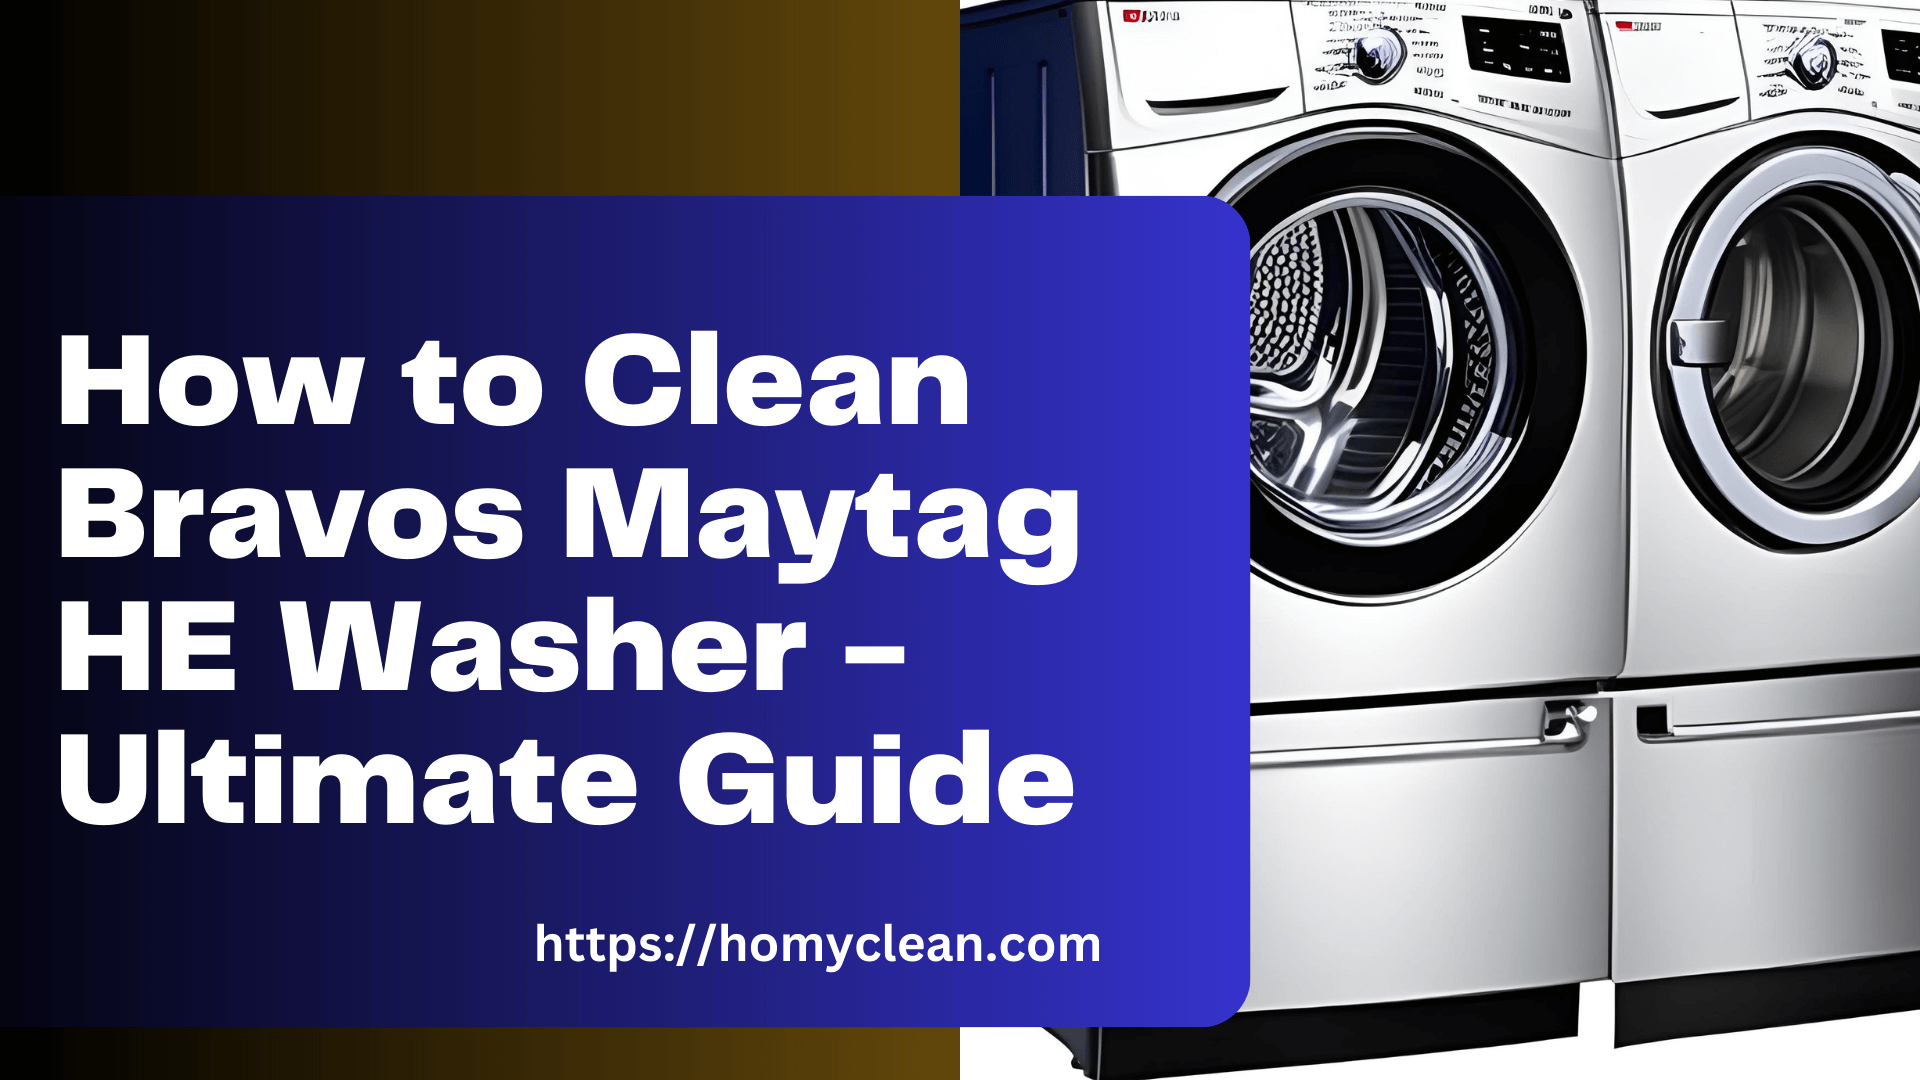 How to Clean Bravos Maytag HE Washer: The Ultimate Guide